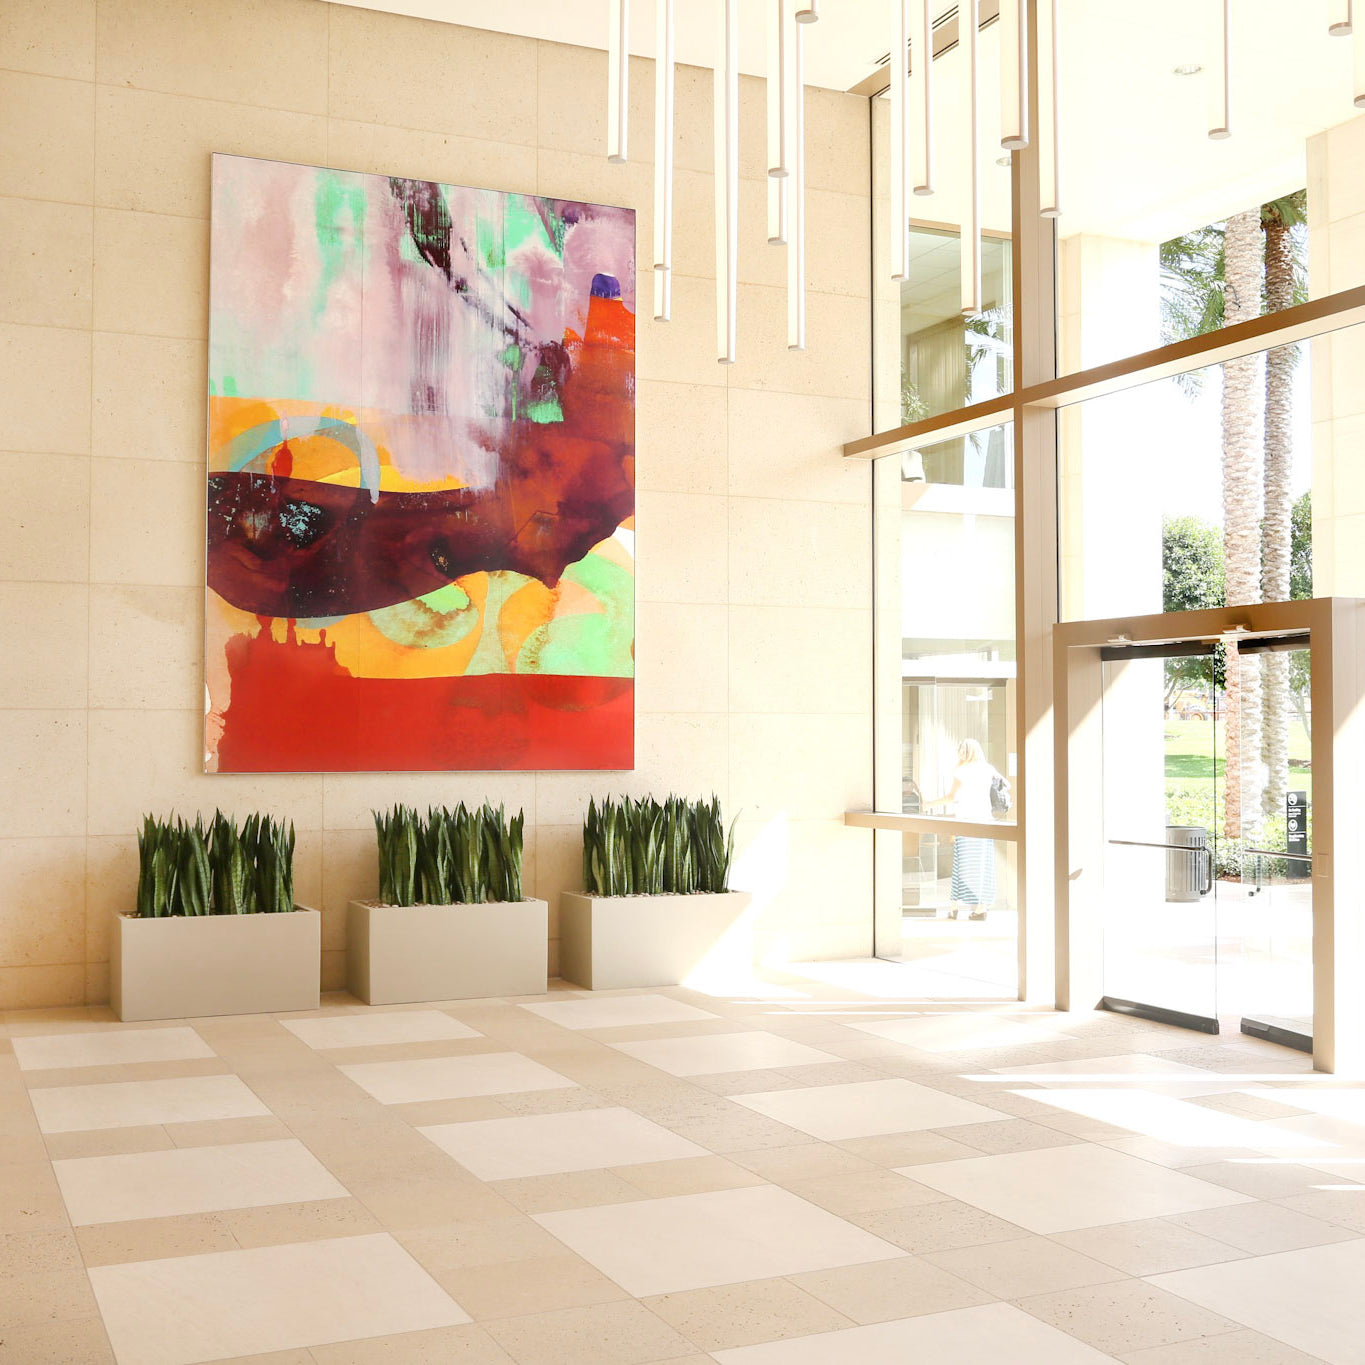 The grand foyer of 300 Spectrum Center decorated with a colorful custom artwork canvas with warm hues, creating a striking contrast with the elegant travertine walls and clean geometric lines of the space.